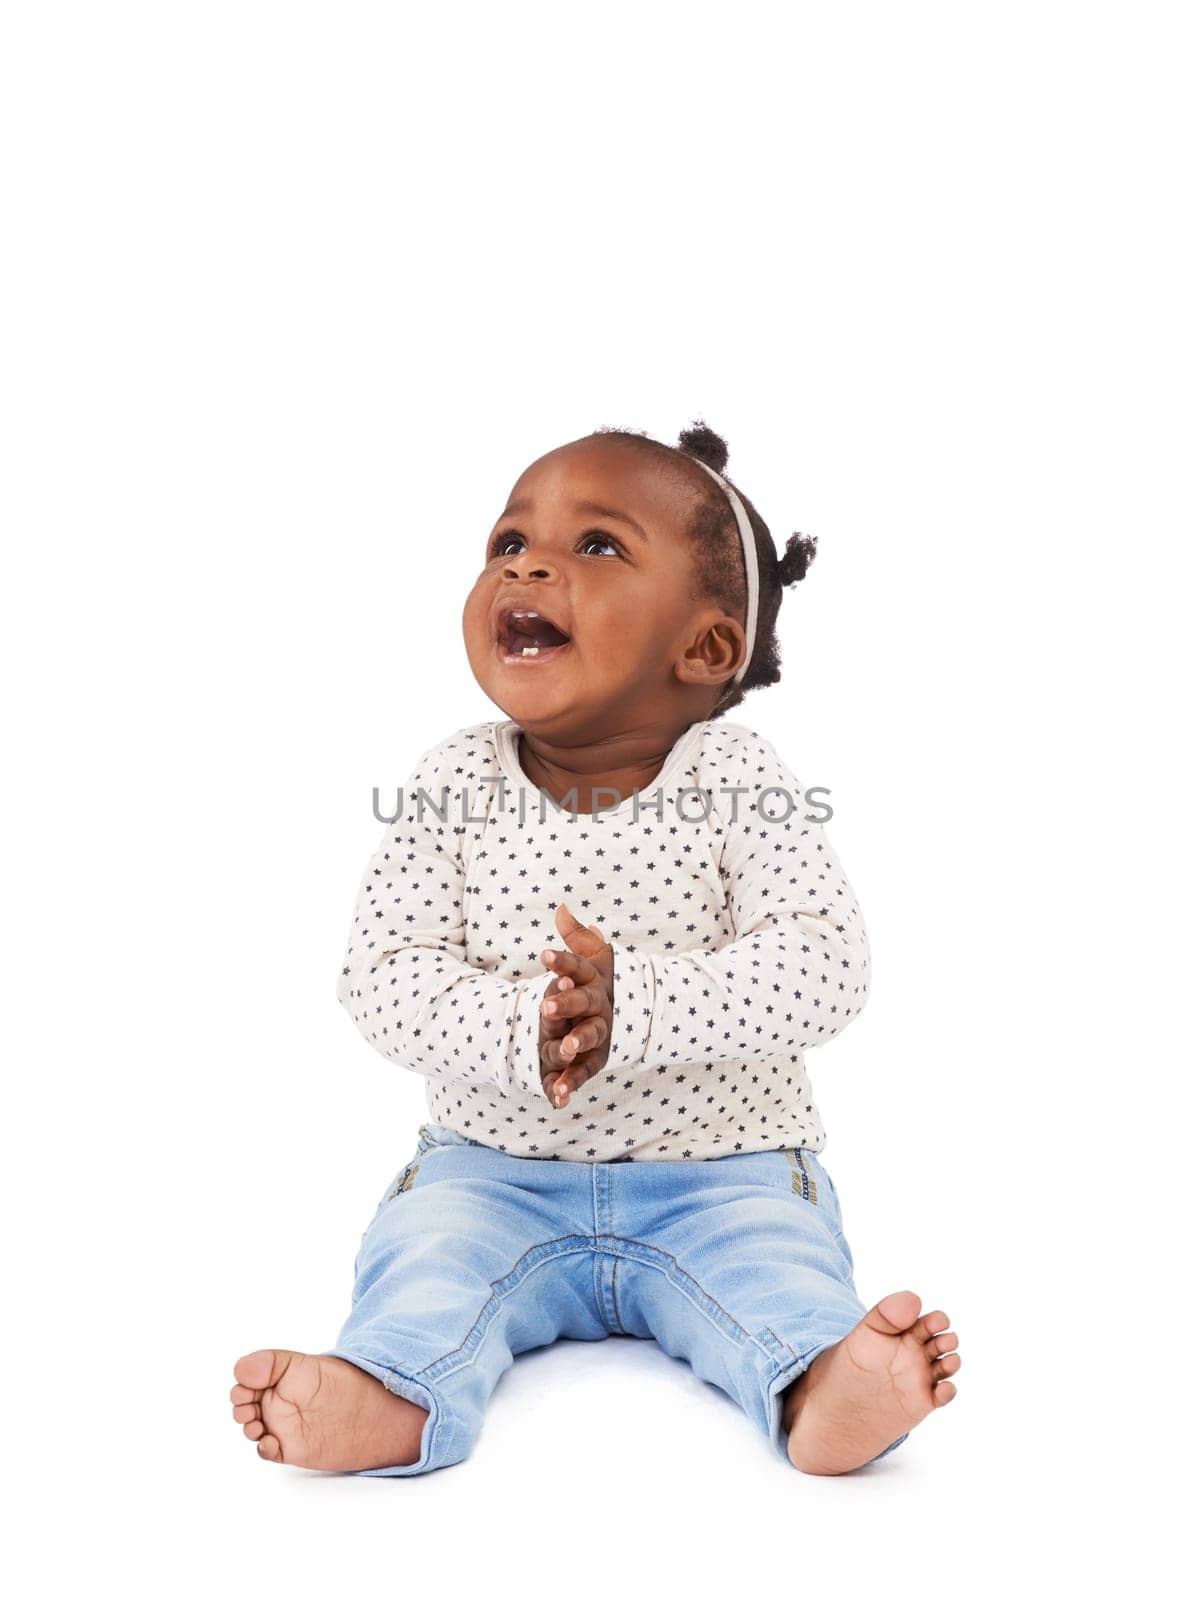 Baby girl, playing and clapping with smile in studio for applause, fun and cheerful on white background. Child, learning and motor skills for childhood development, excited and happy kid or infant by YuriArcurs